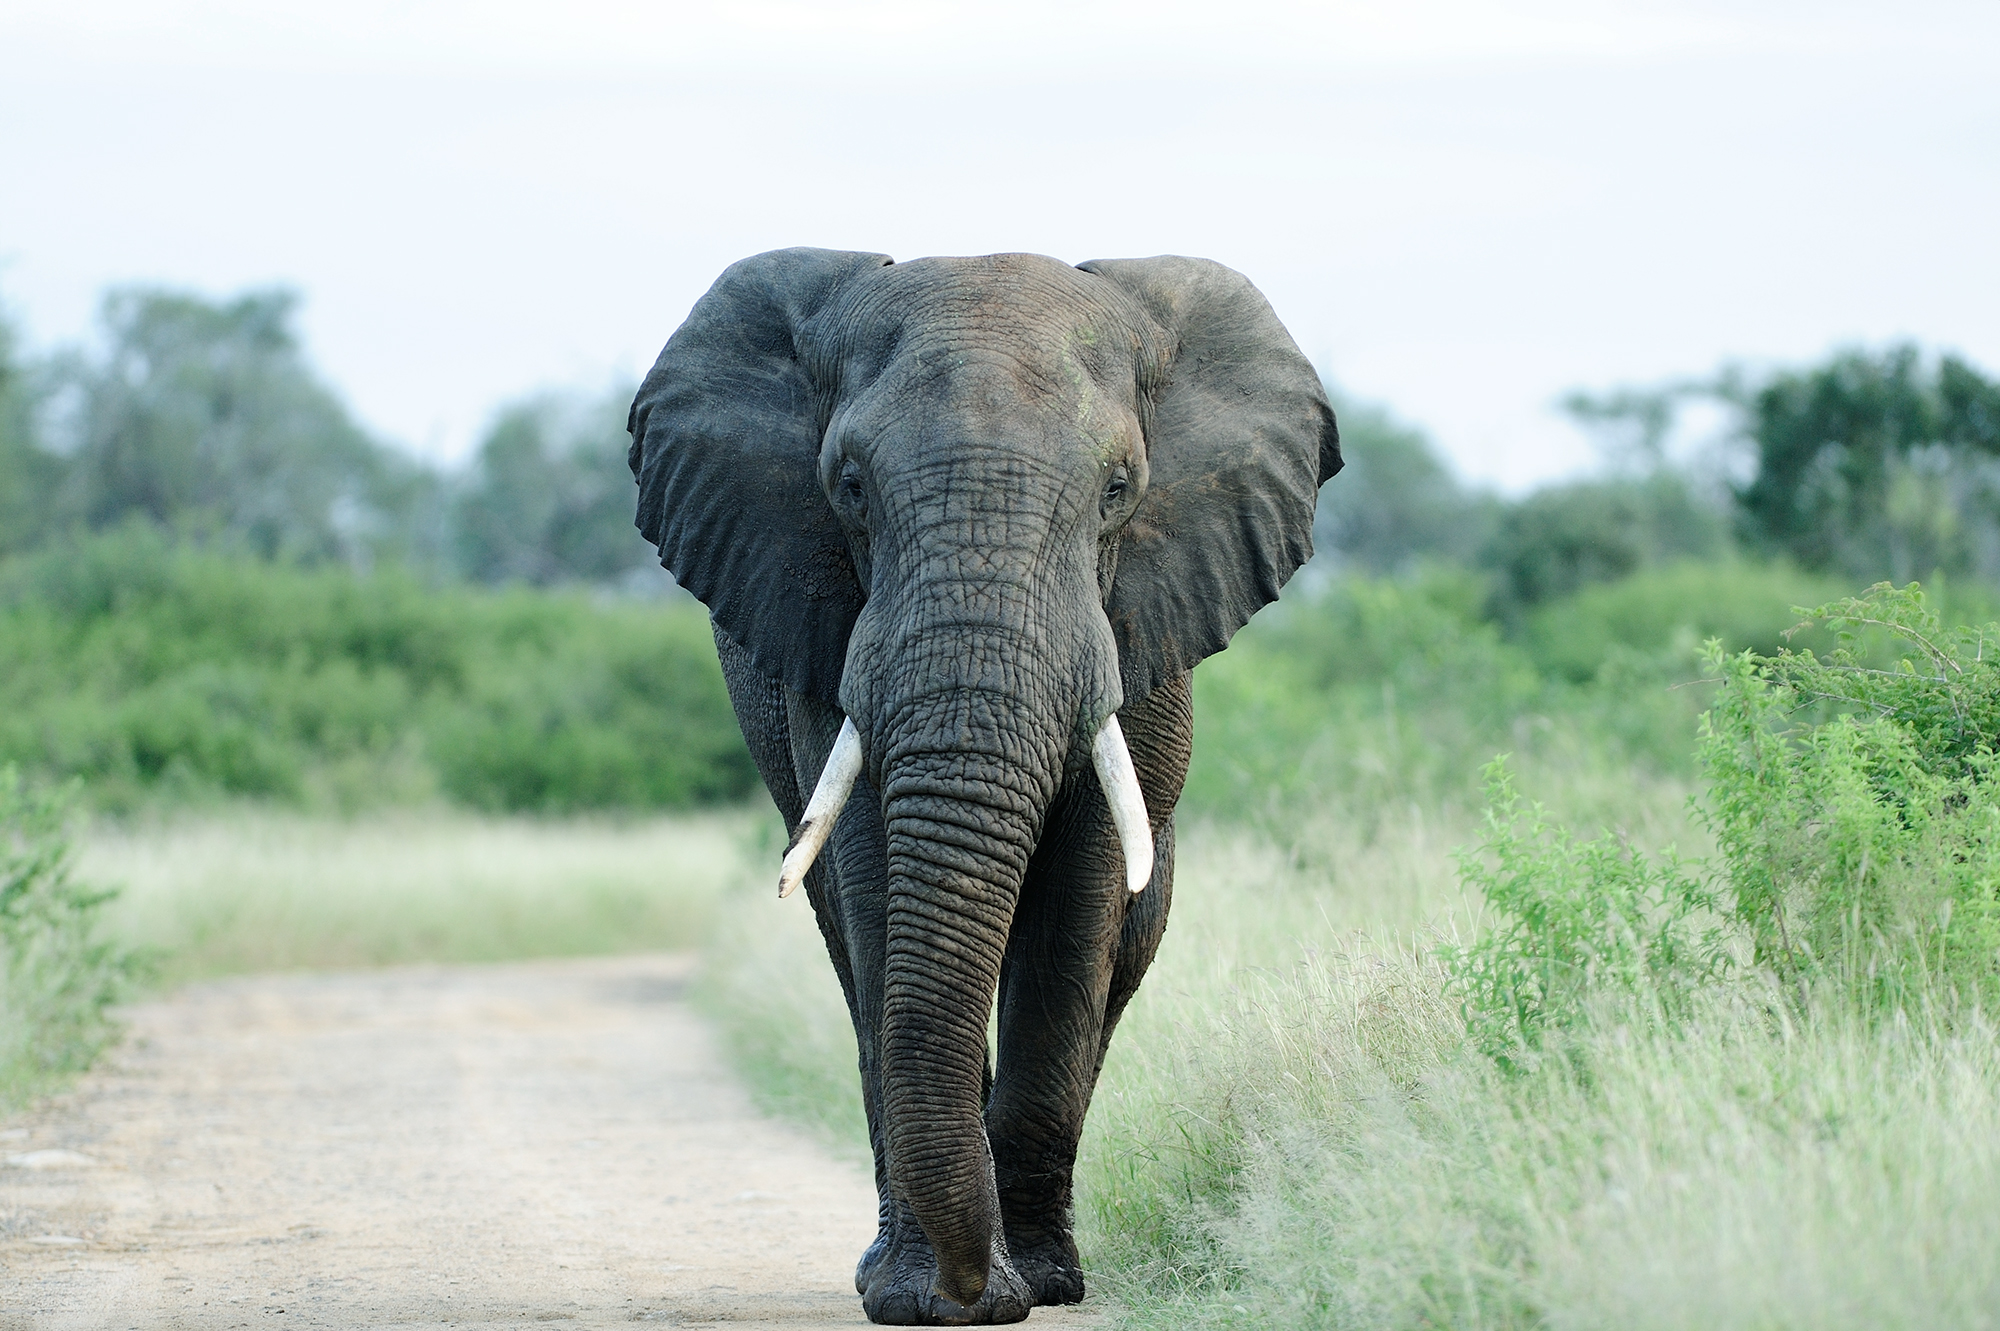 A beautiful elephant on a gravel pathway surrounded by green grass and trees